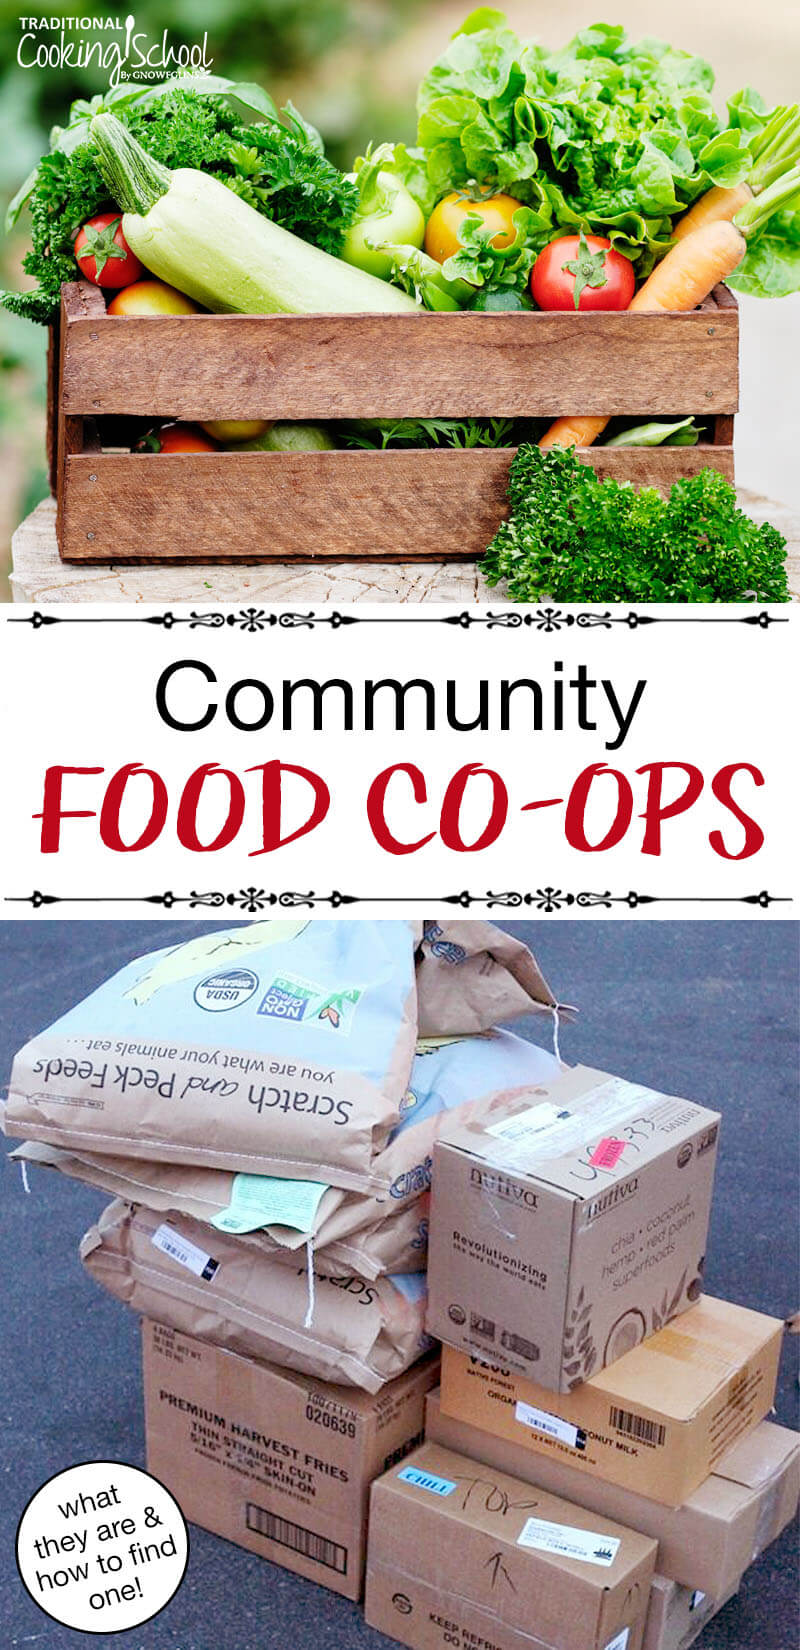 photo collage of bulk food and produce, with text overlay: "Community Food Co-Ops (what they are & how to find one!)"